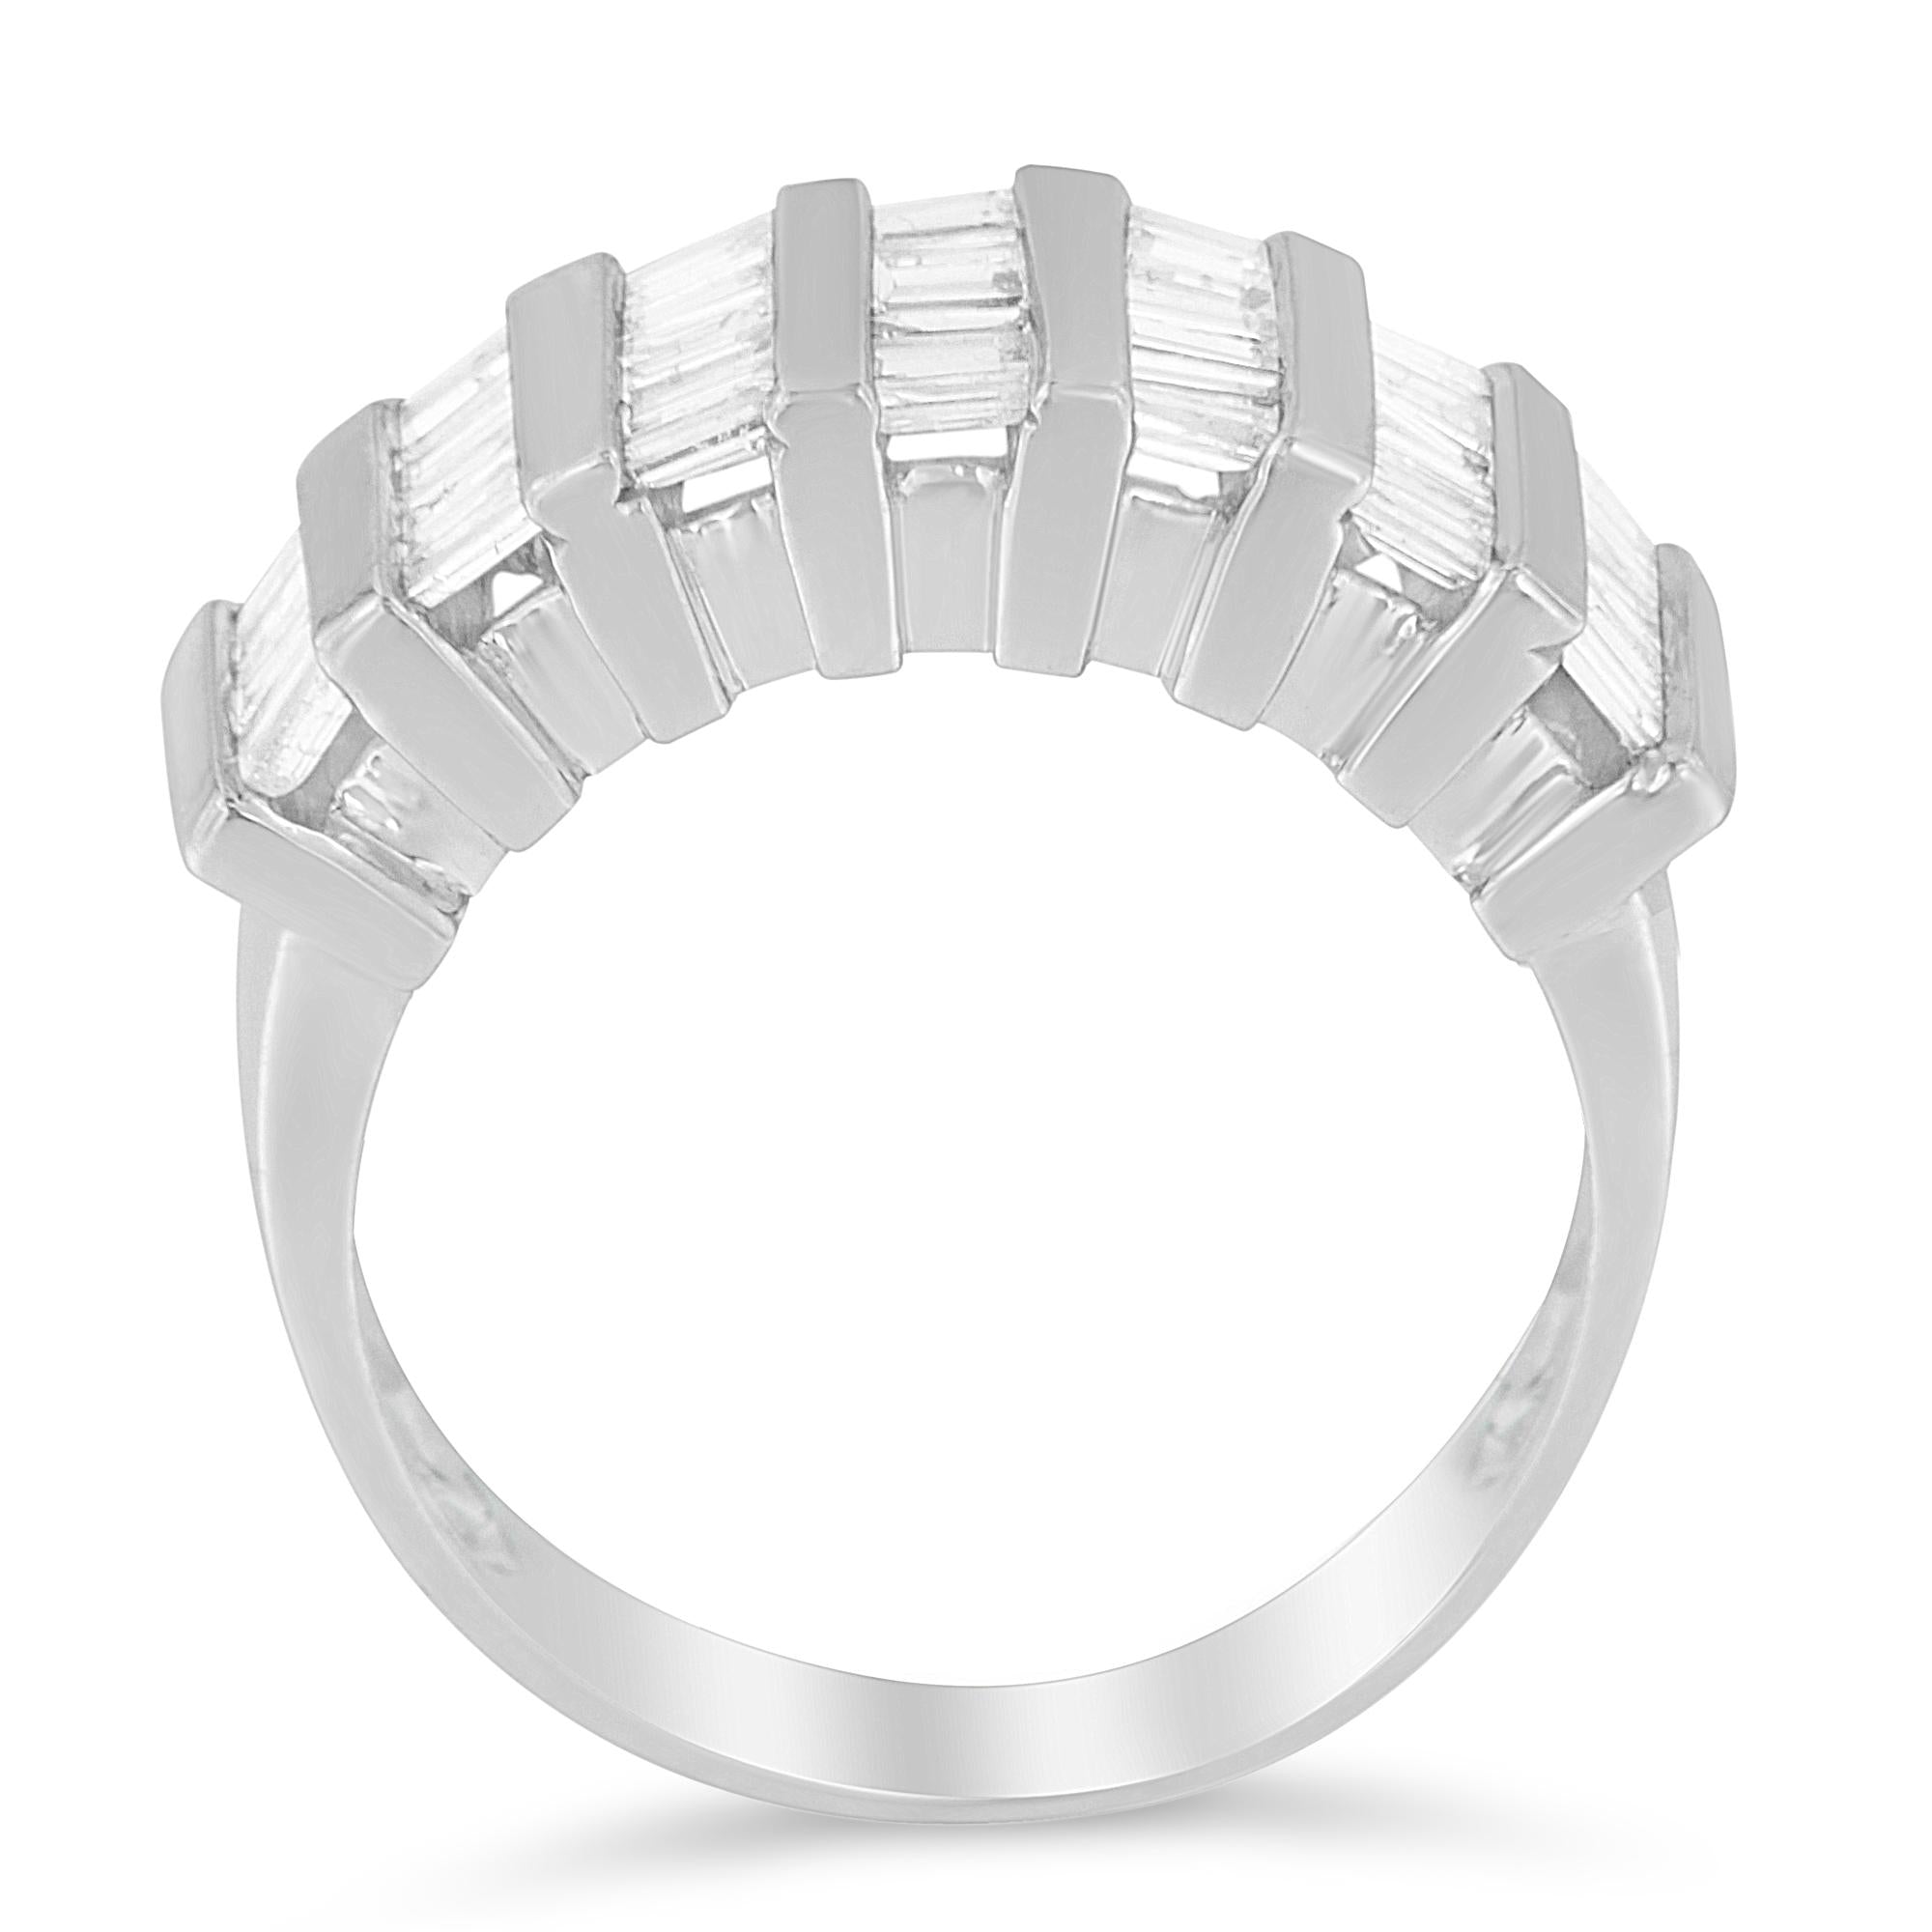 .925 Sterling Silver 1.0 Cttw Baguette Cut Diamond Vertical Channel Fluted  Multi-Row Unisex Fashion Wedding Ring (H-I Color, I1-I2 Clarity)